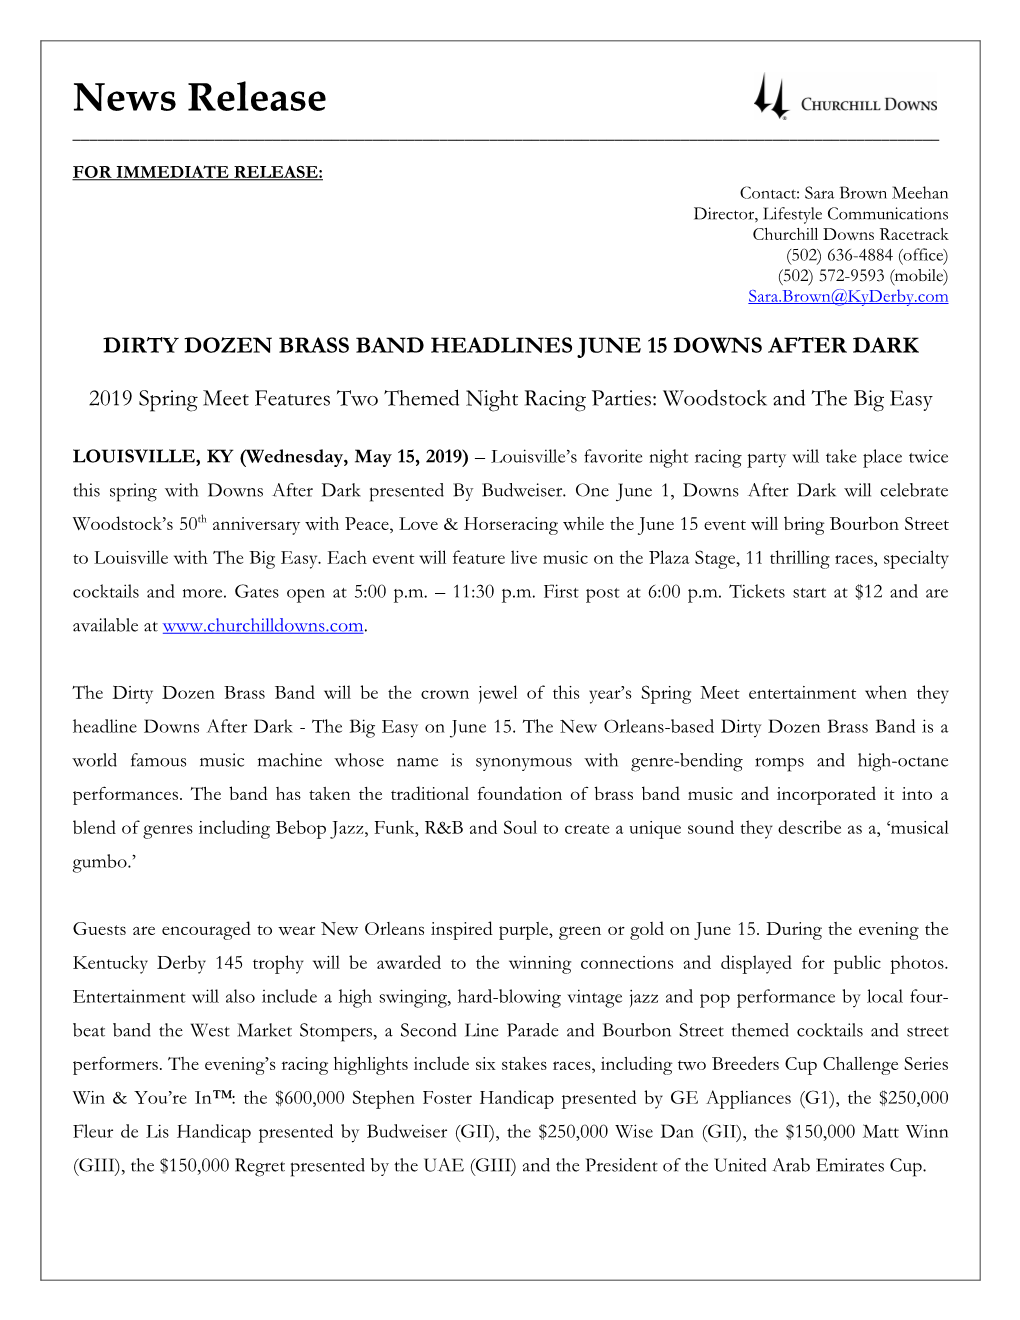 Dirty Dozen Brass Band to Perform at June 15 Downs After Dark